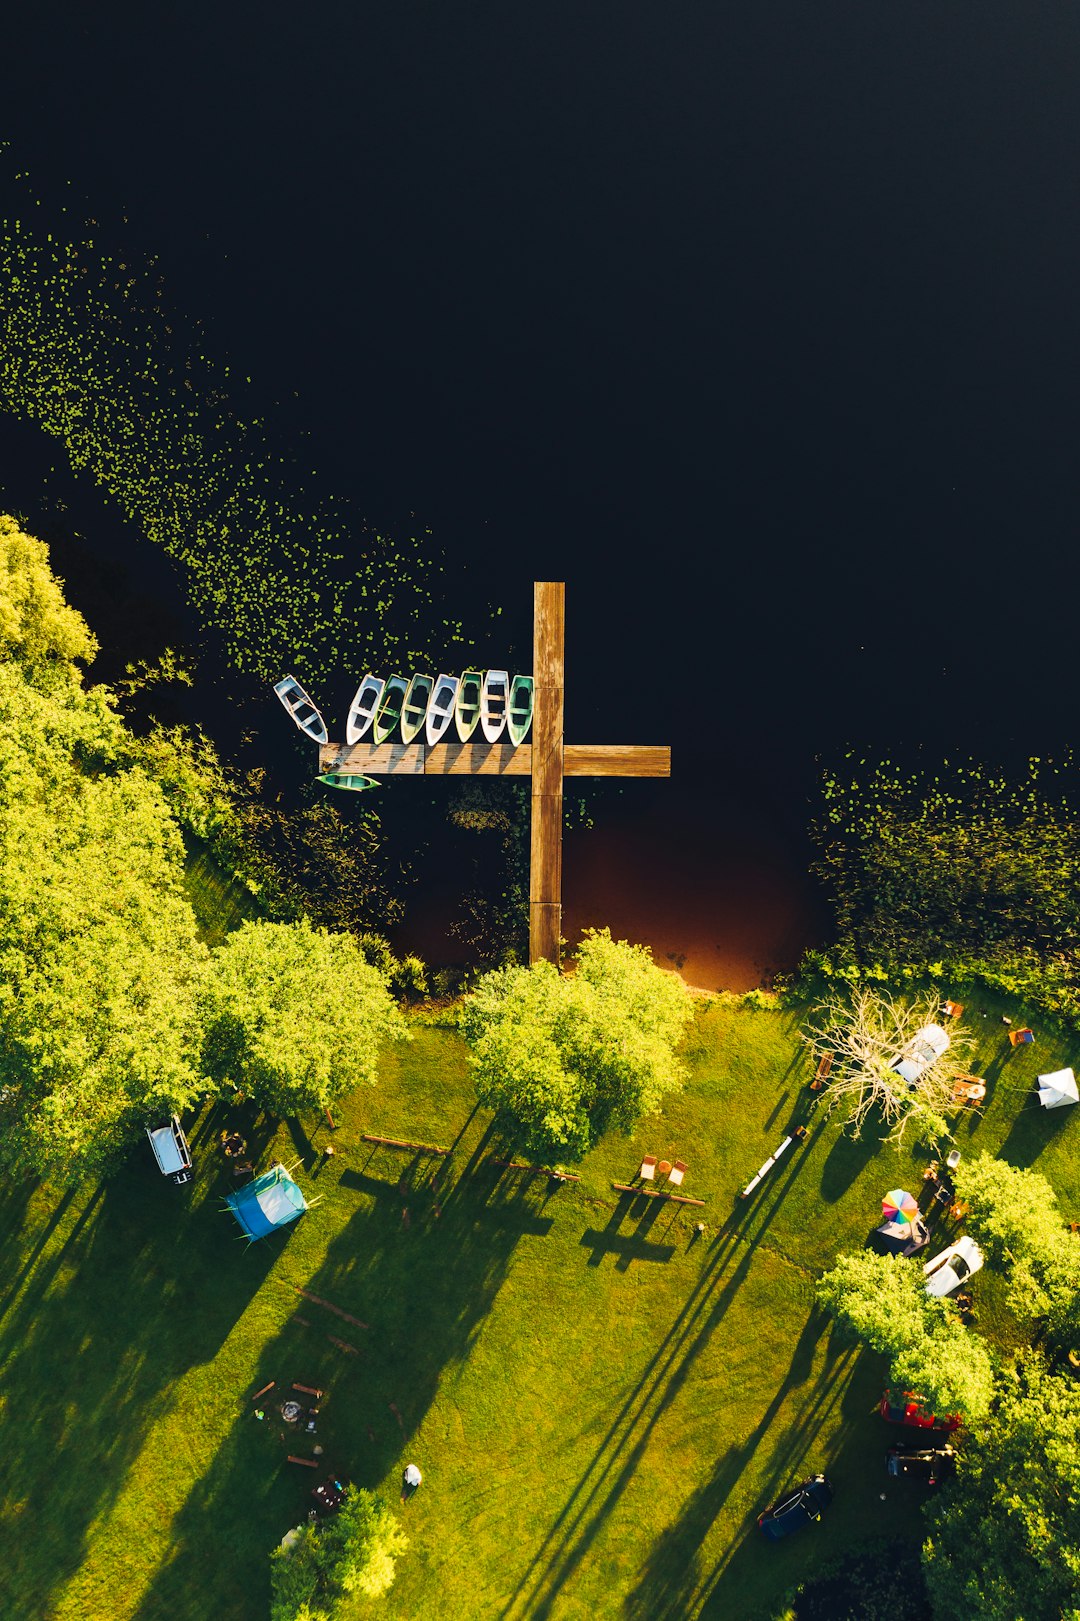 brown wooden cross with cross on top surrounded by green trees during nighttime